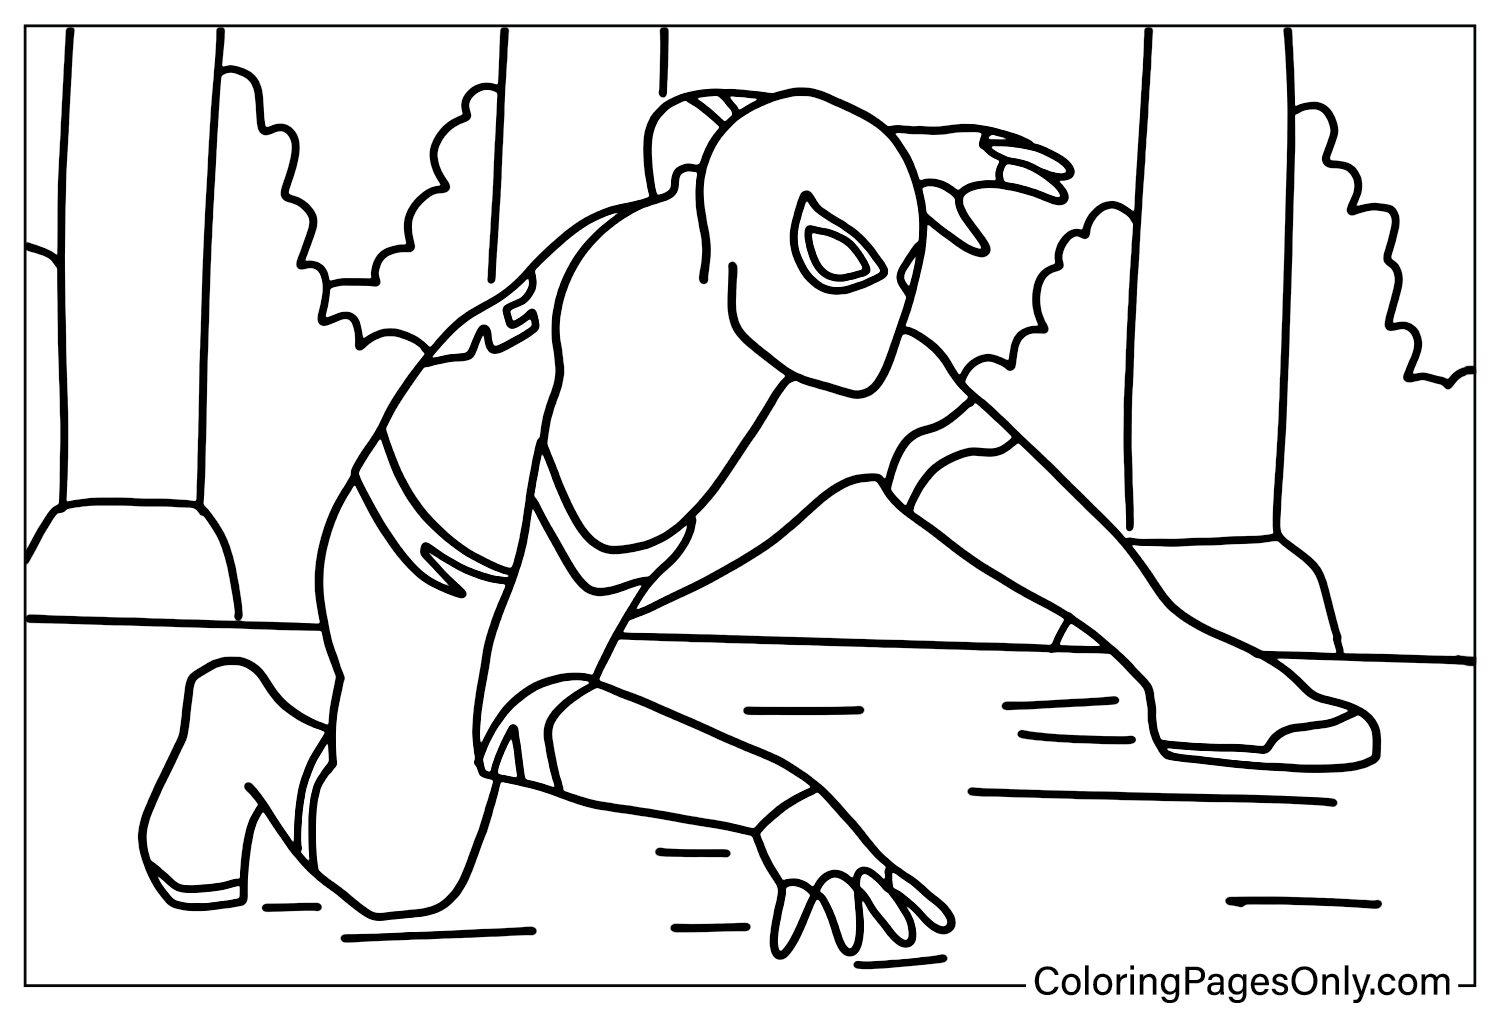 Spider-Man Far From Home Coloring Page Free from Spider-Man Far From Home